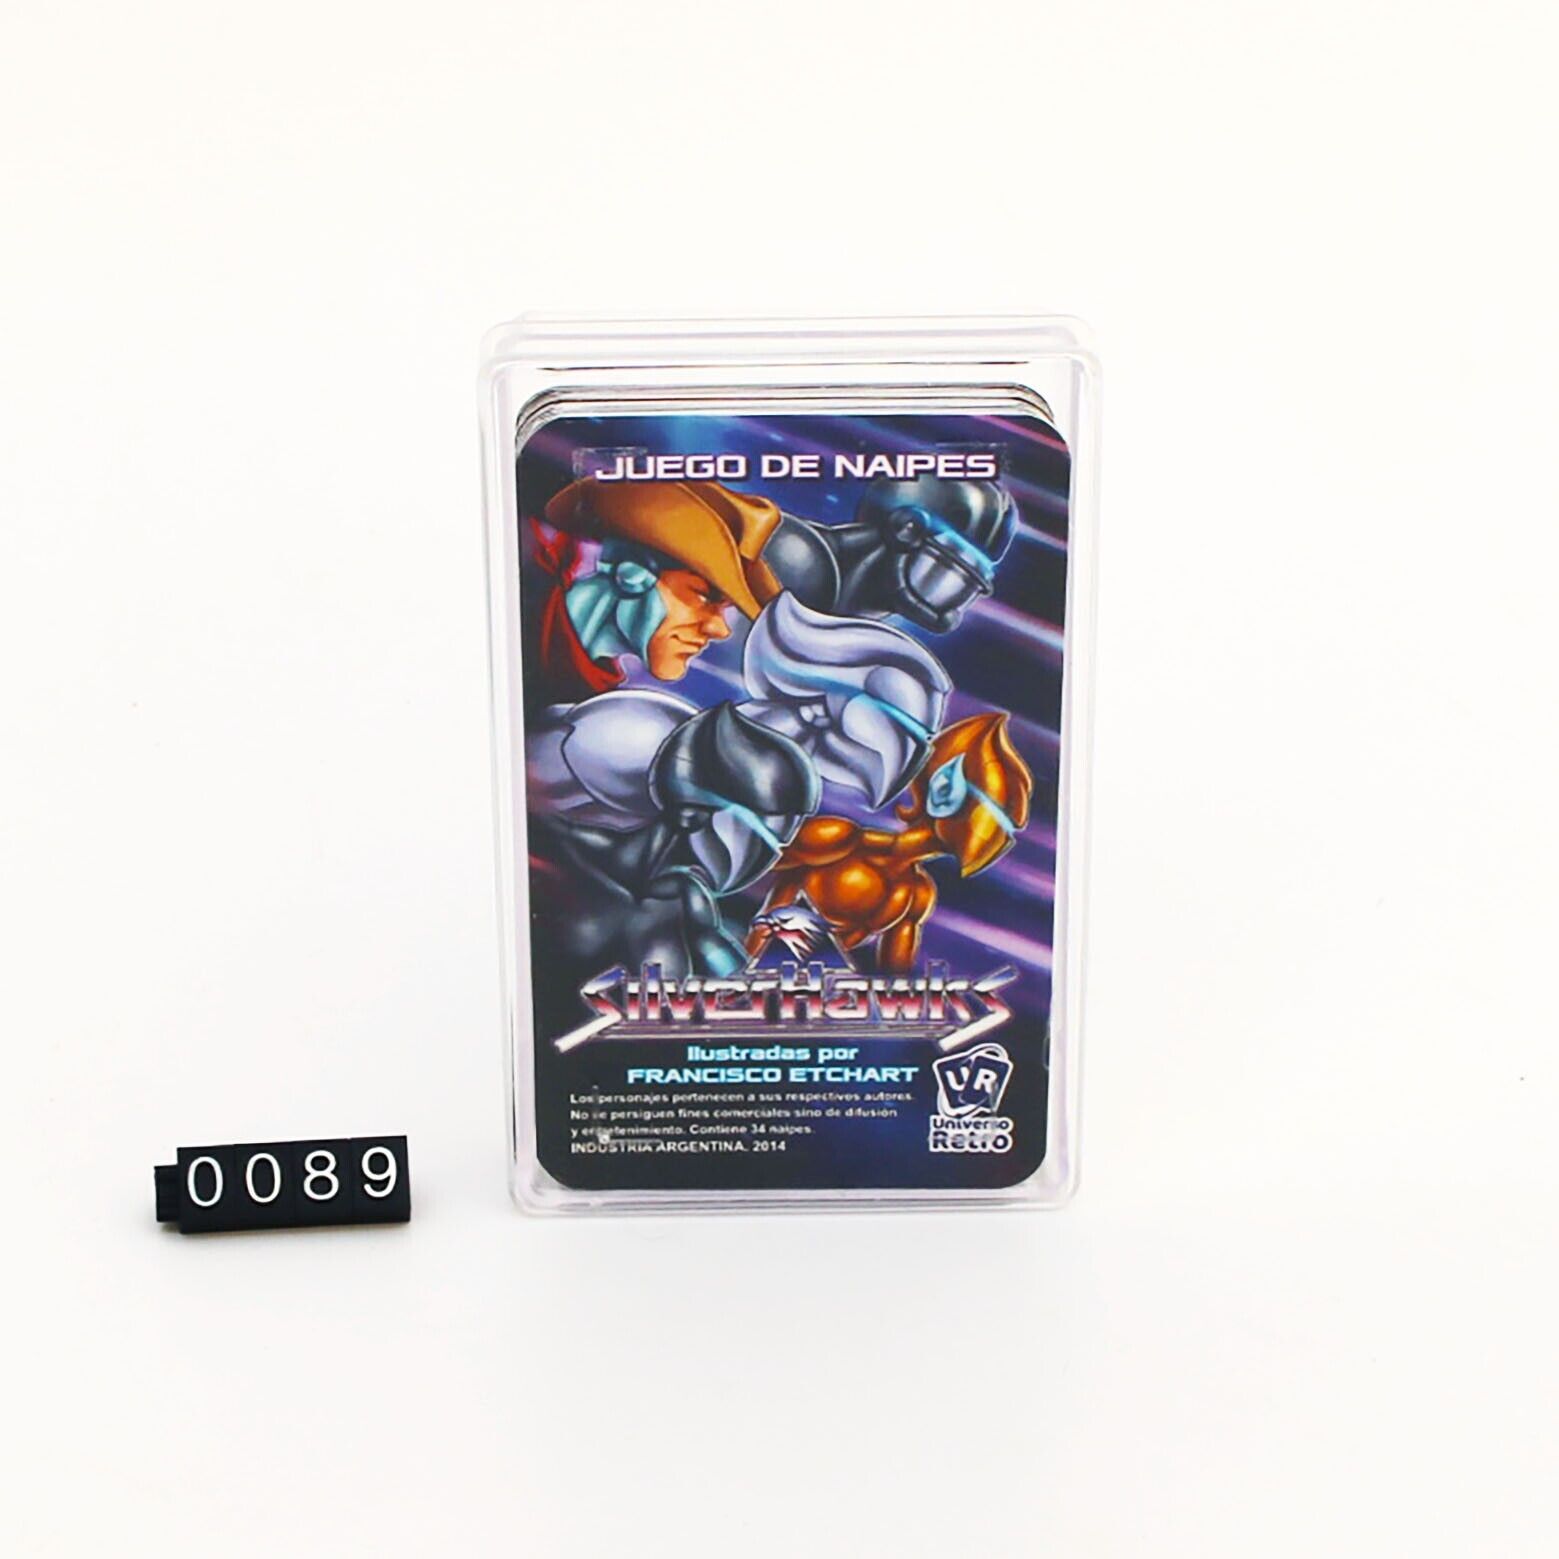 New rare SilverHawks cards game with the characters from ´80s animated tv show